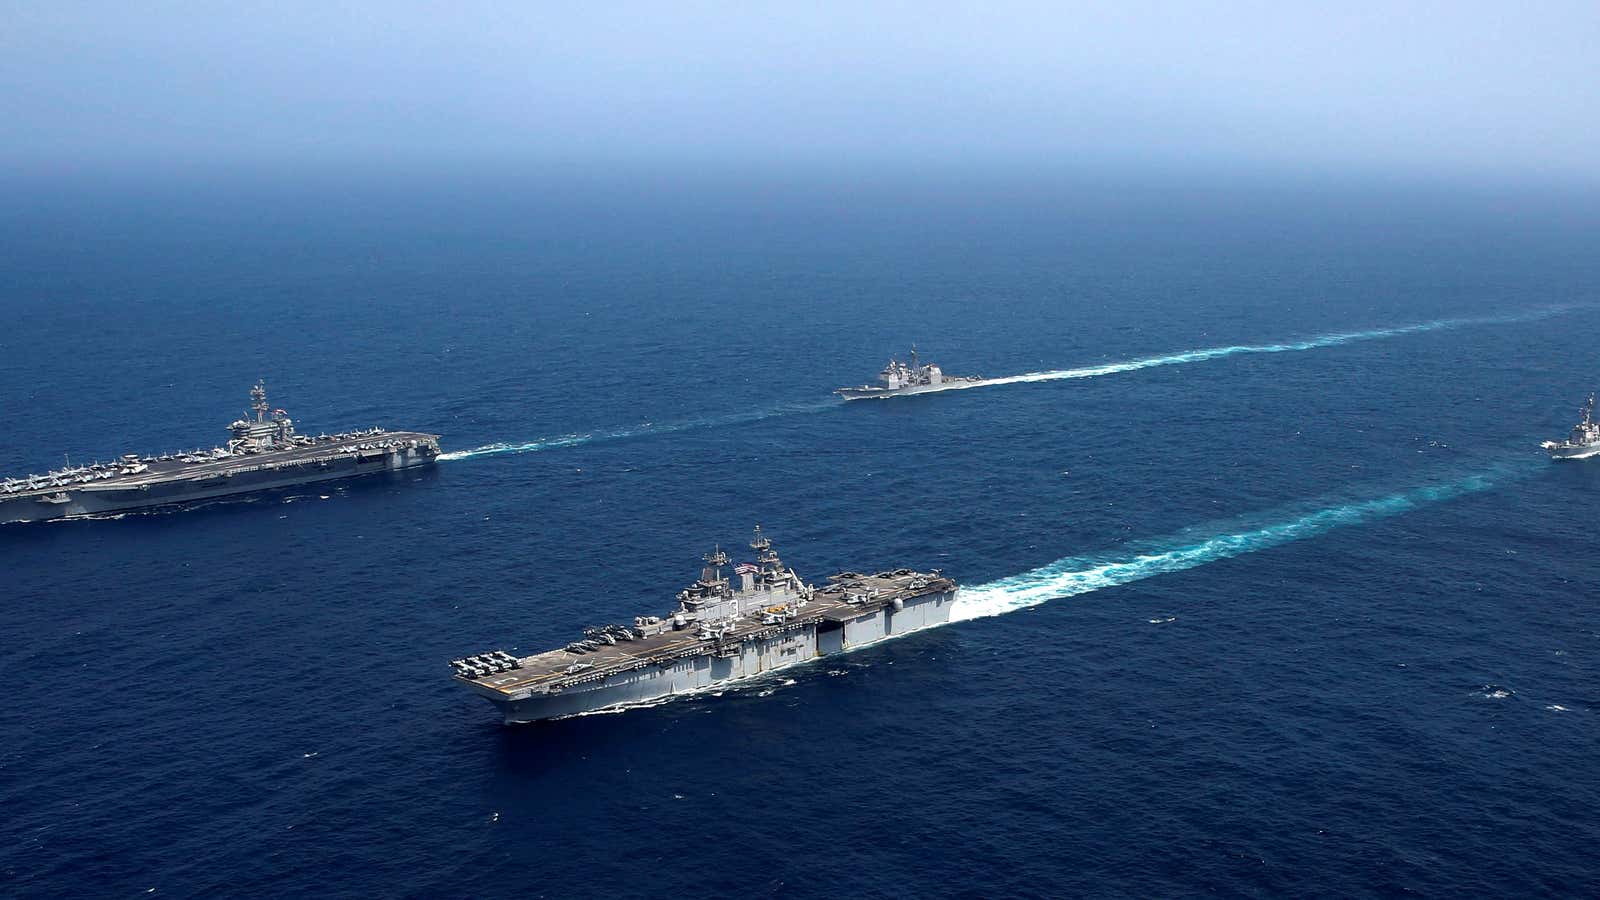 A Navy carrier strike group conducts operations in the Arabian Sea on May 17, 2019.